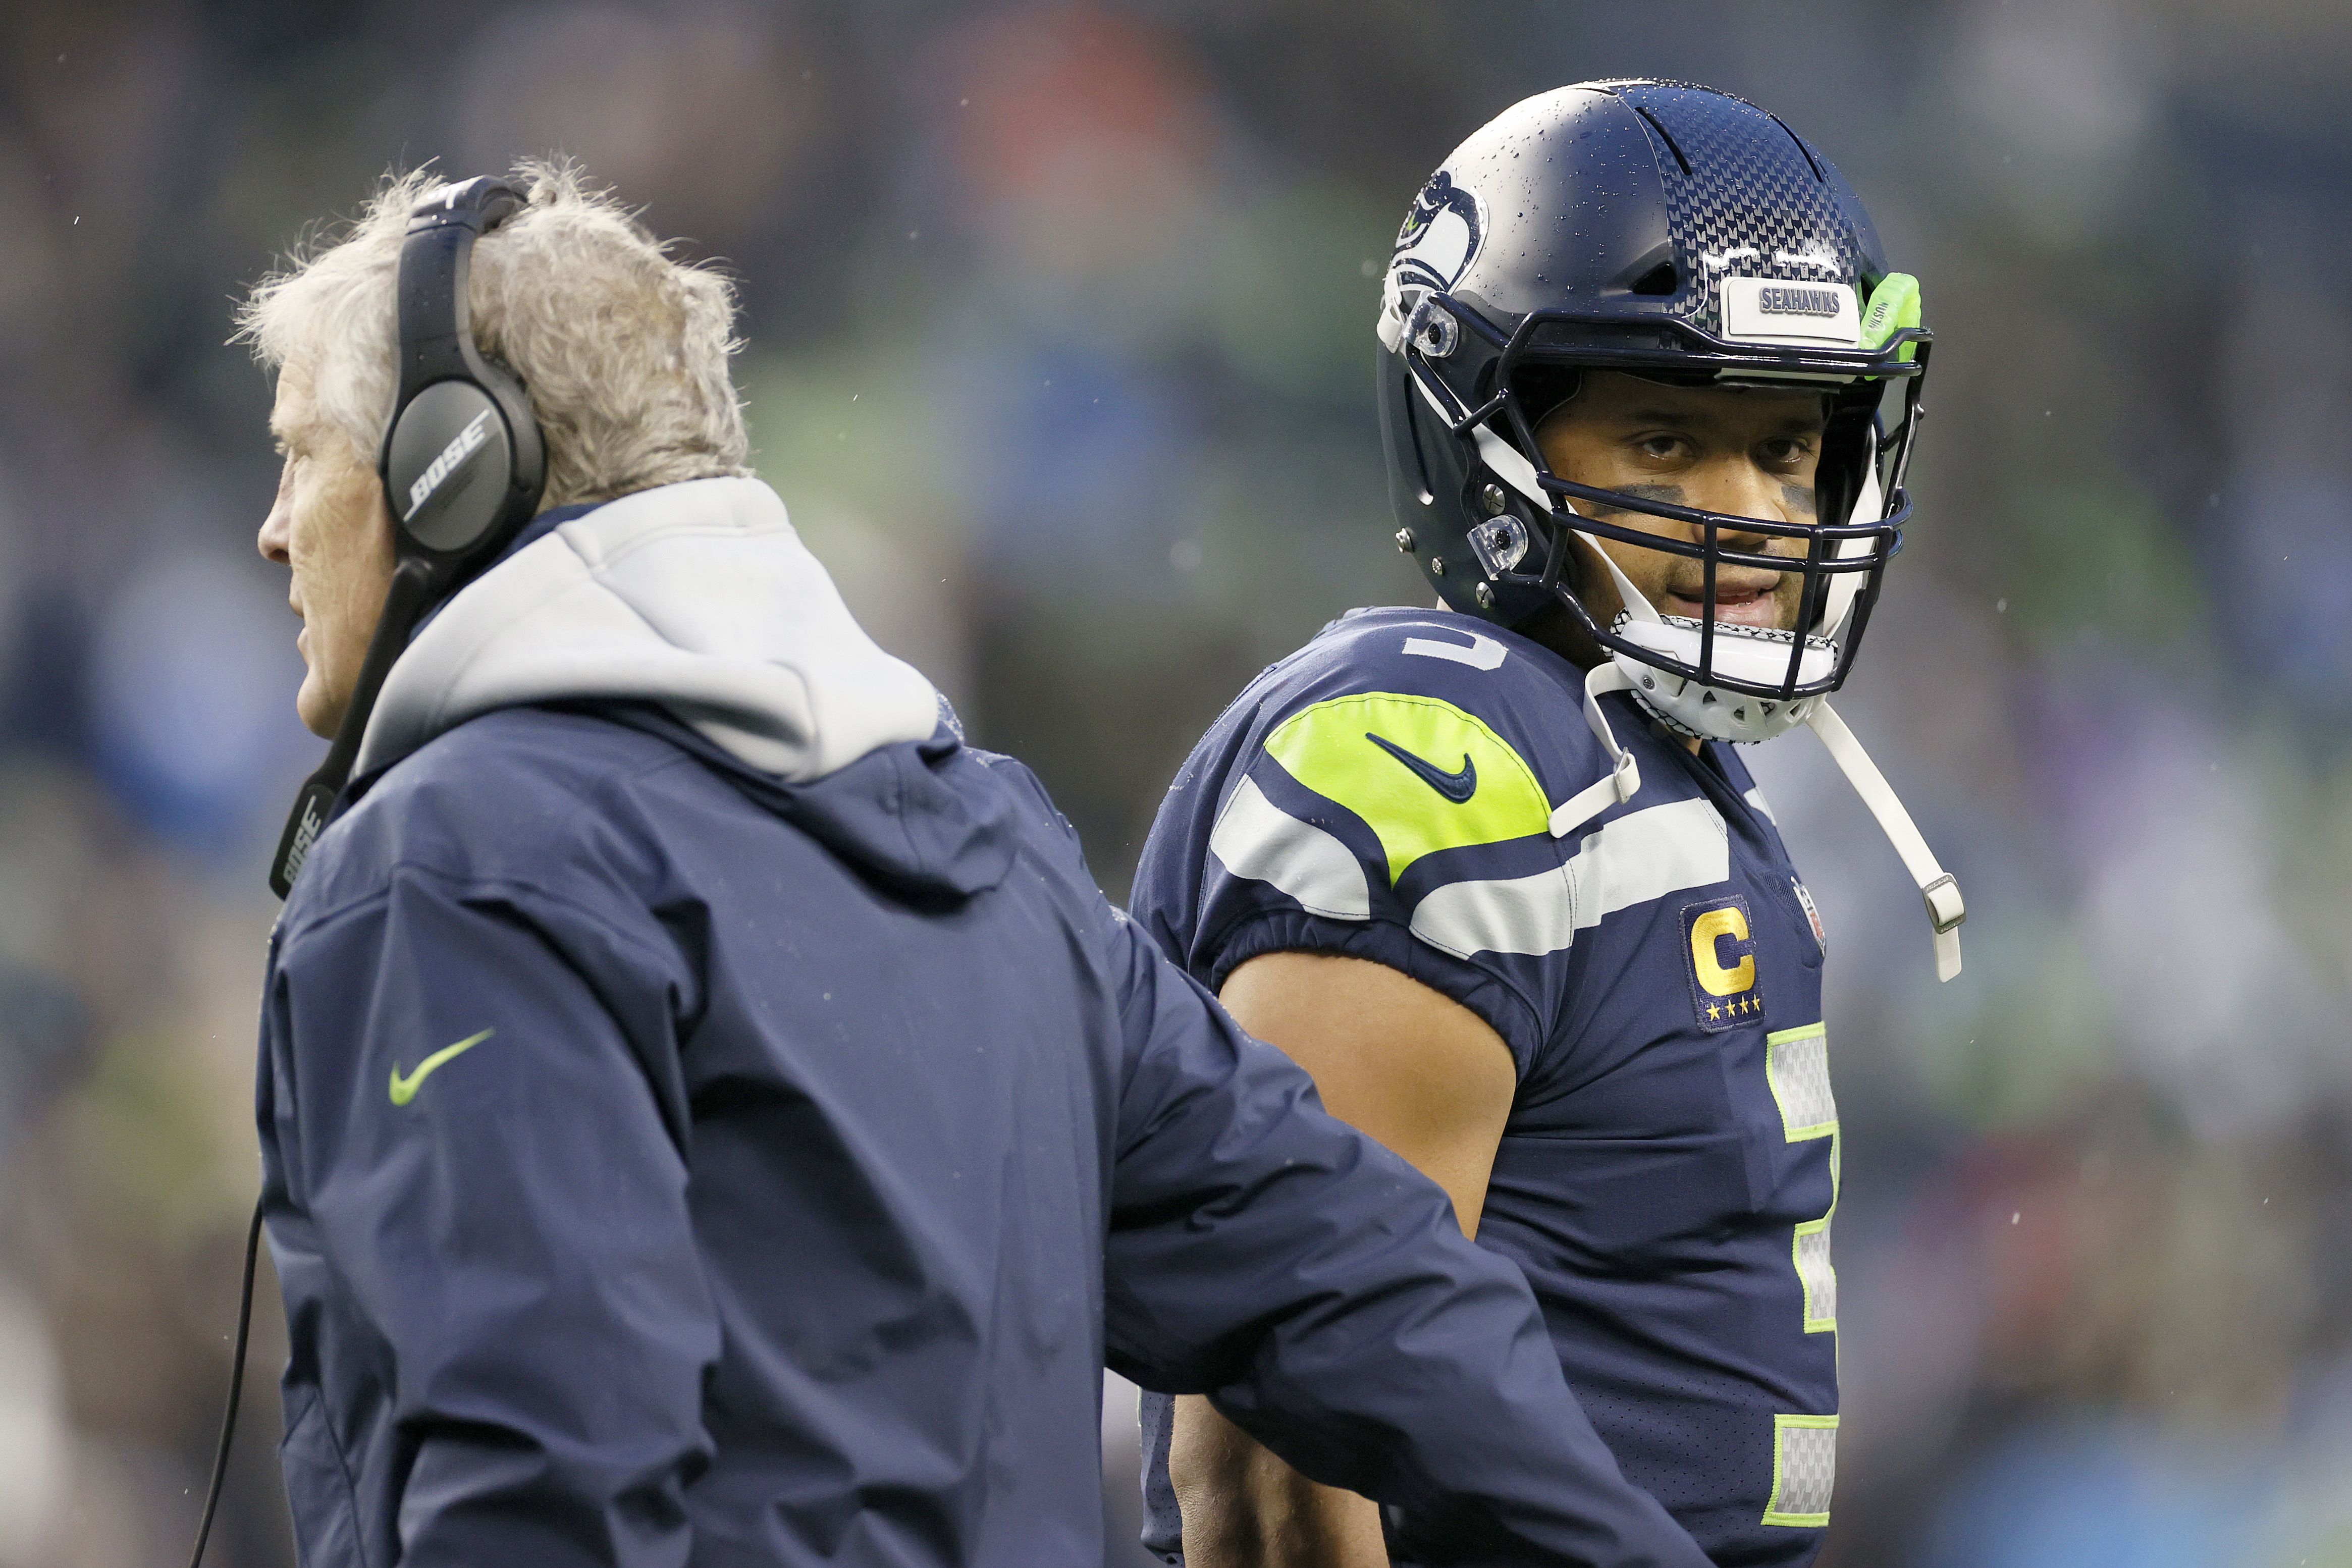 Super Bowl XLVIII -- Seattle Seahawks QB Russell Wilson plays for